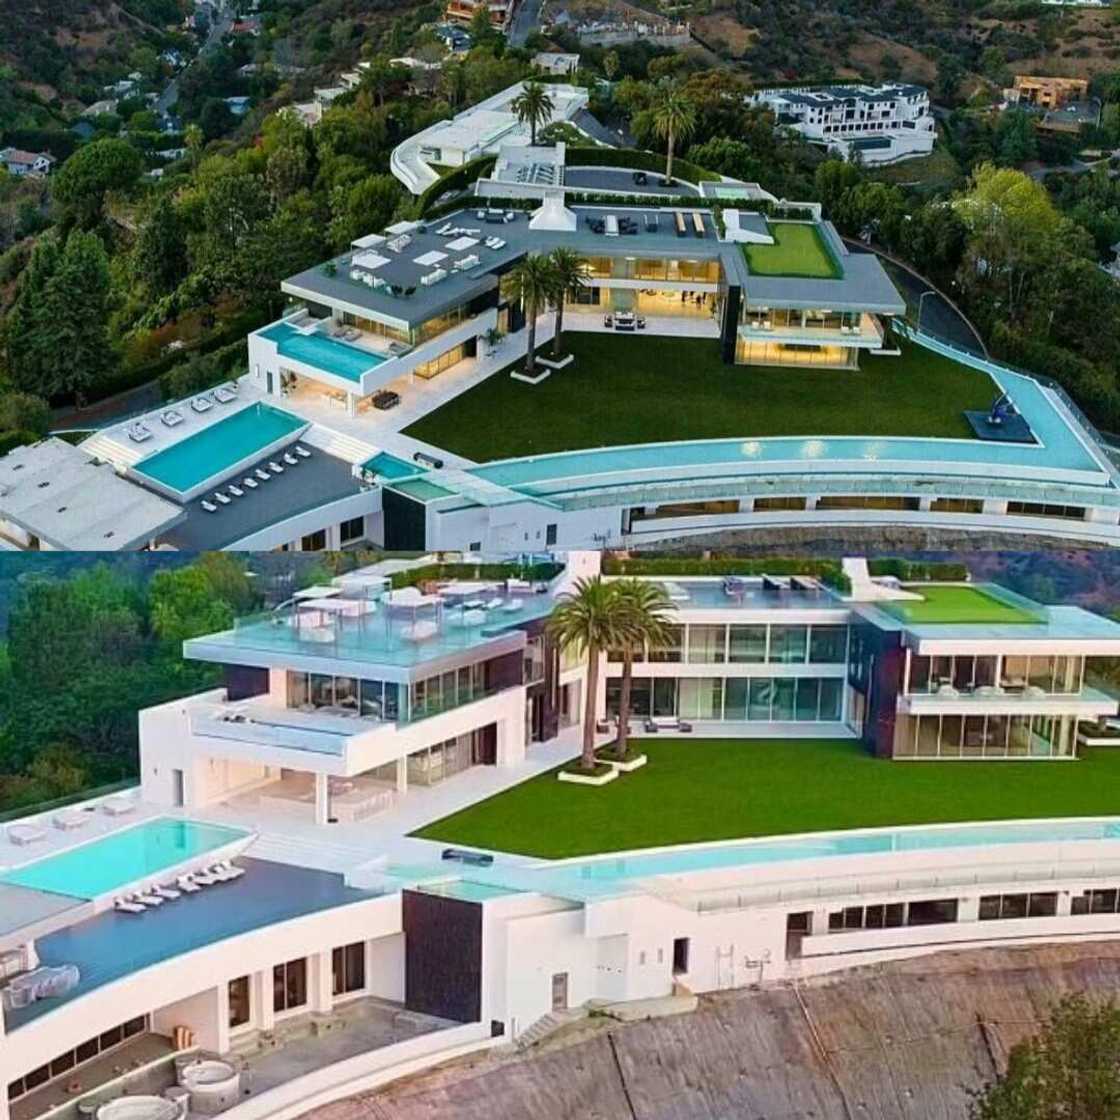 the most expensive house in the world